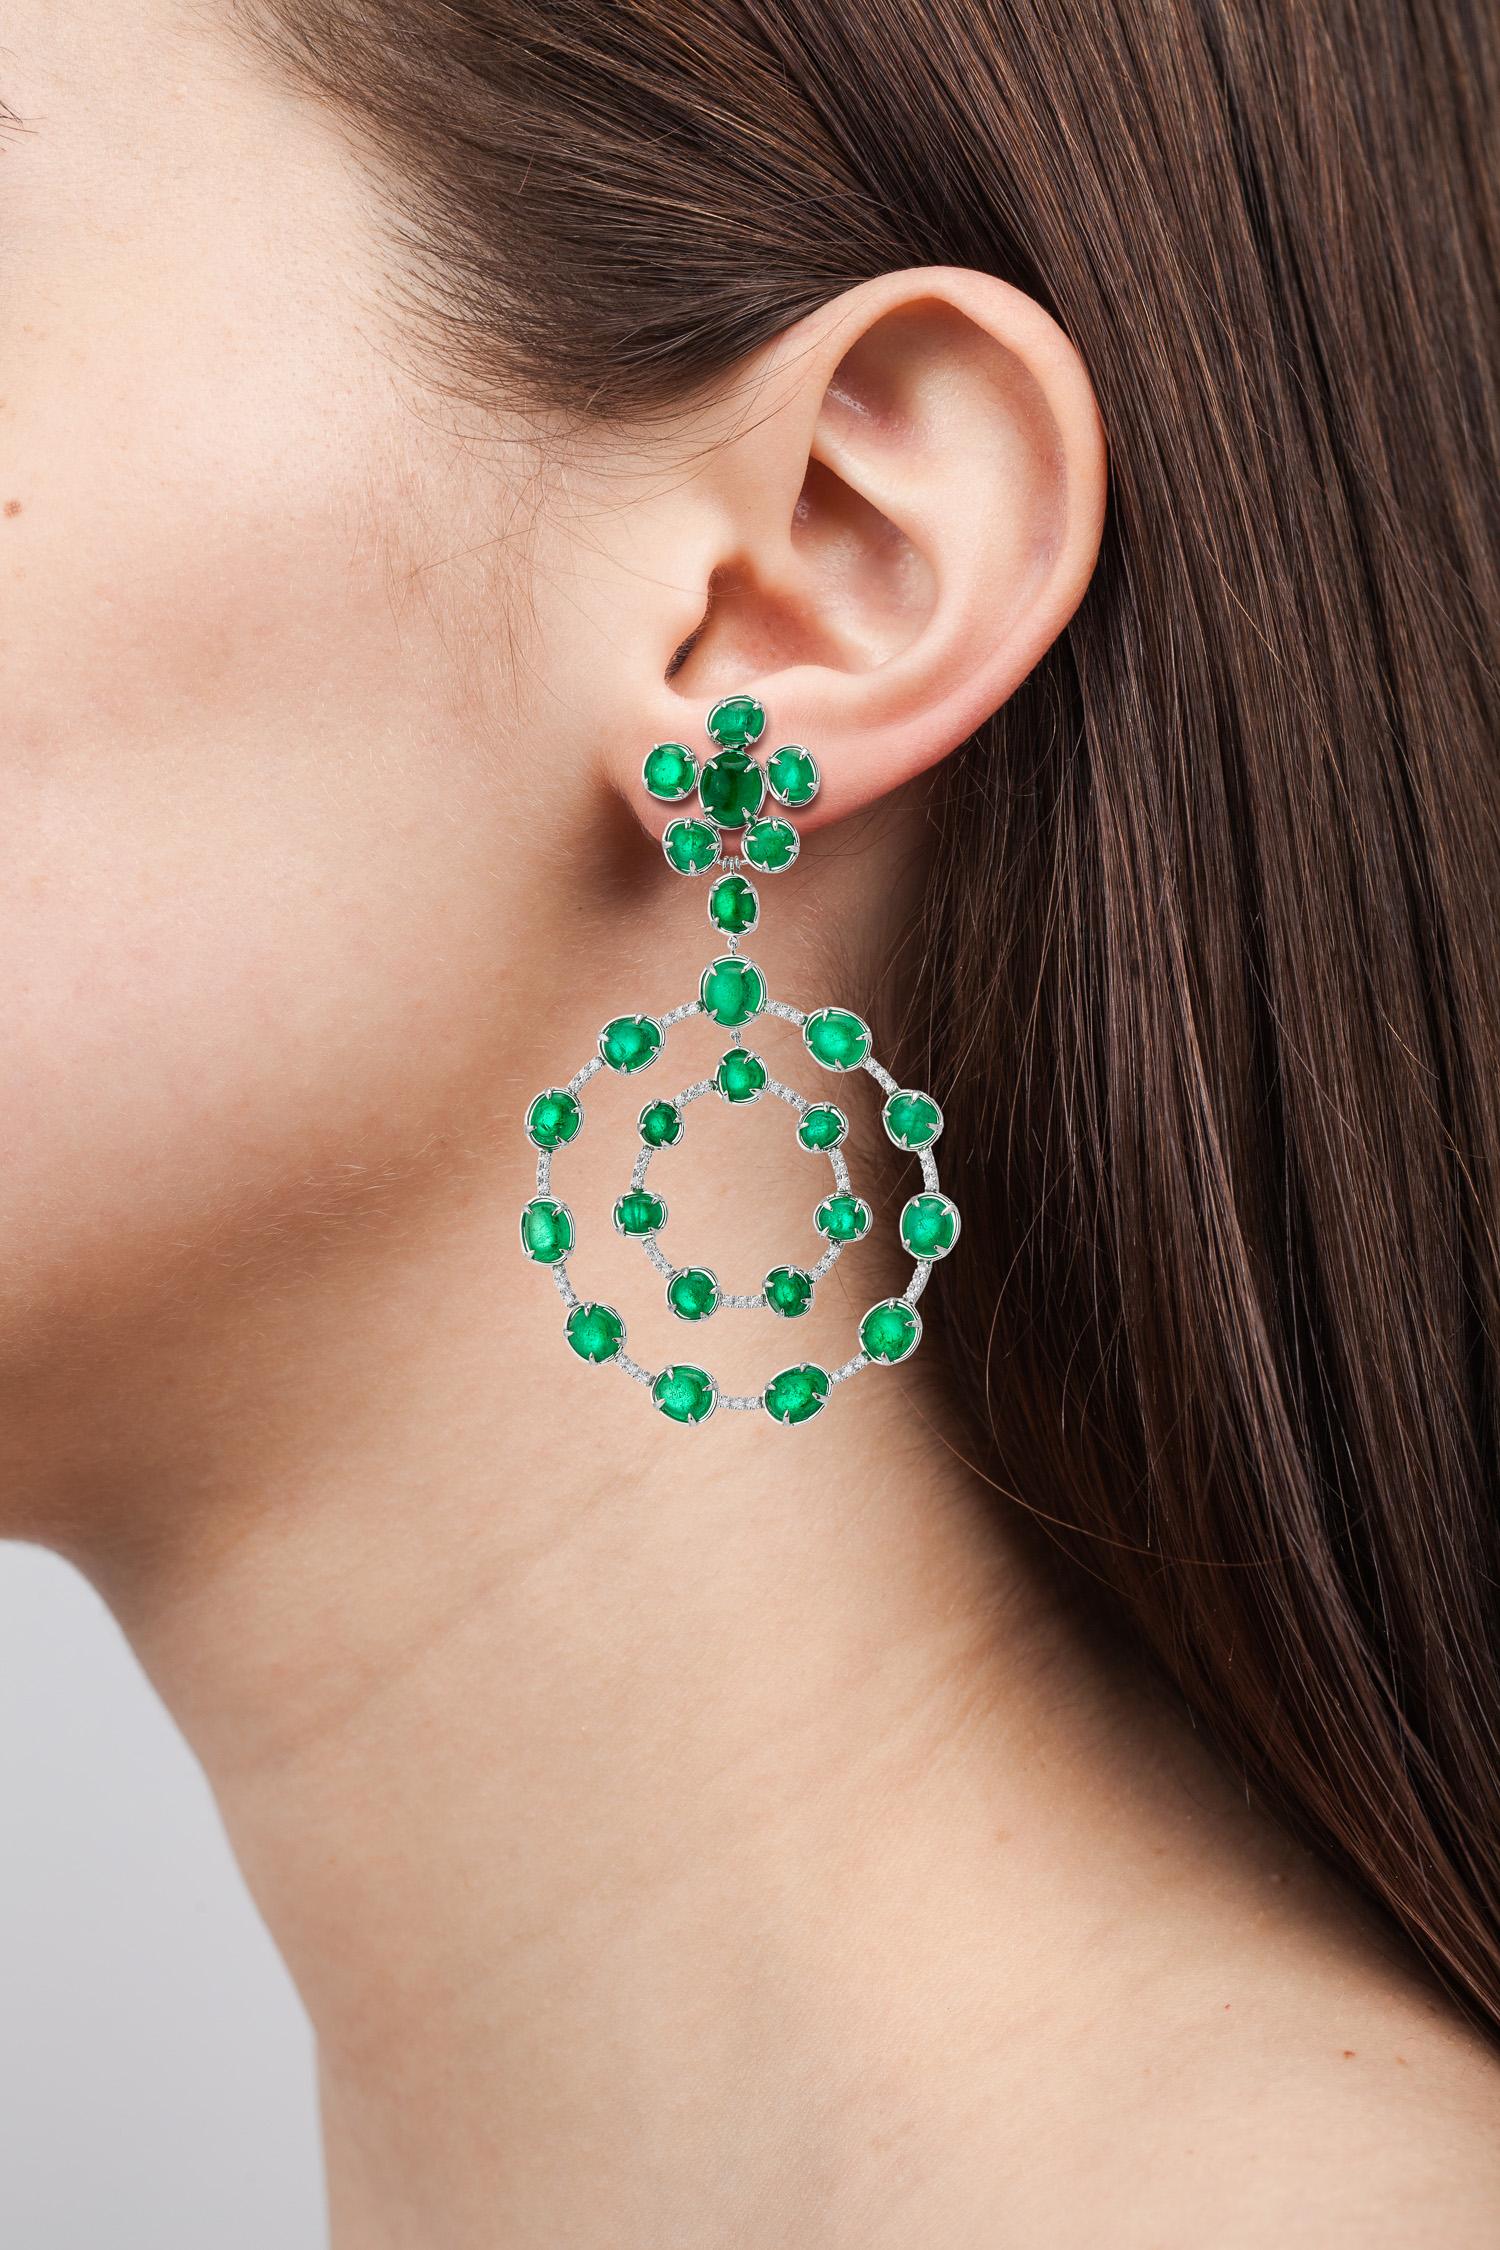 Contemporary statement earrings set in 18 Karat white gold with 67.25 carats of Muzo Colombian emeralds and 1.08 carats of diamond pave.

Muzo Emerald Colombia Heritage Royal Orb Earrings set with 67.25 carats Emerald.

One of 3 artifacts from the